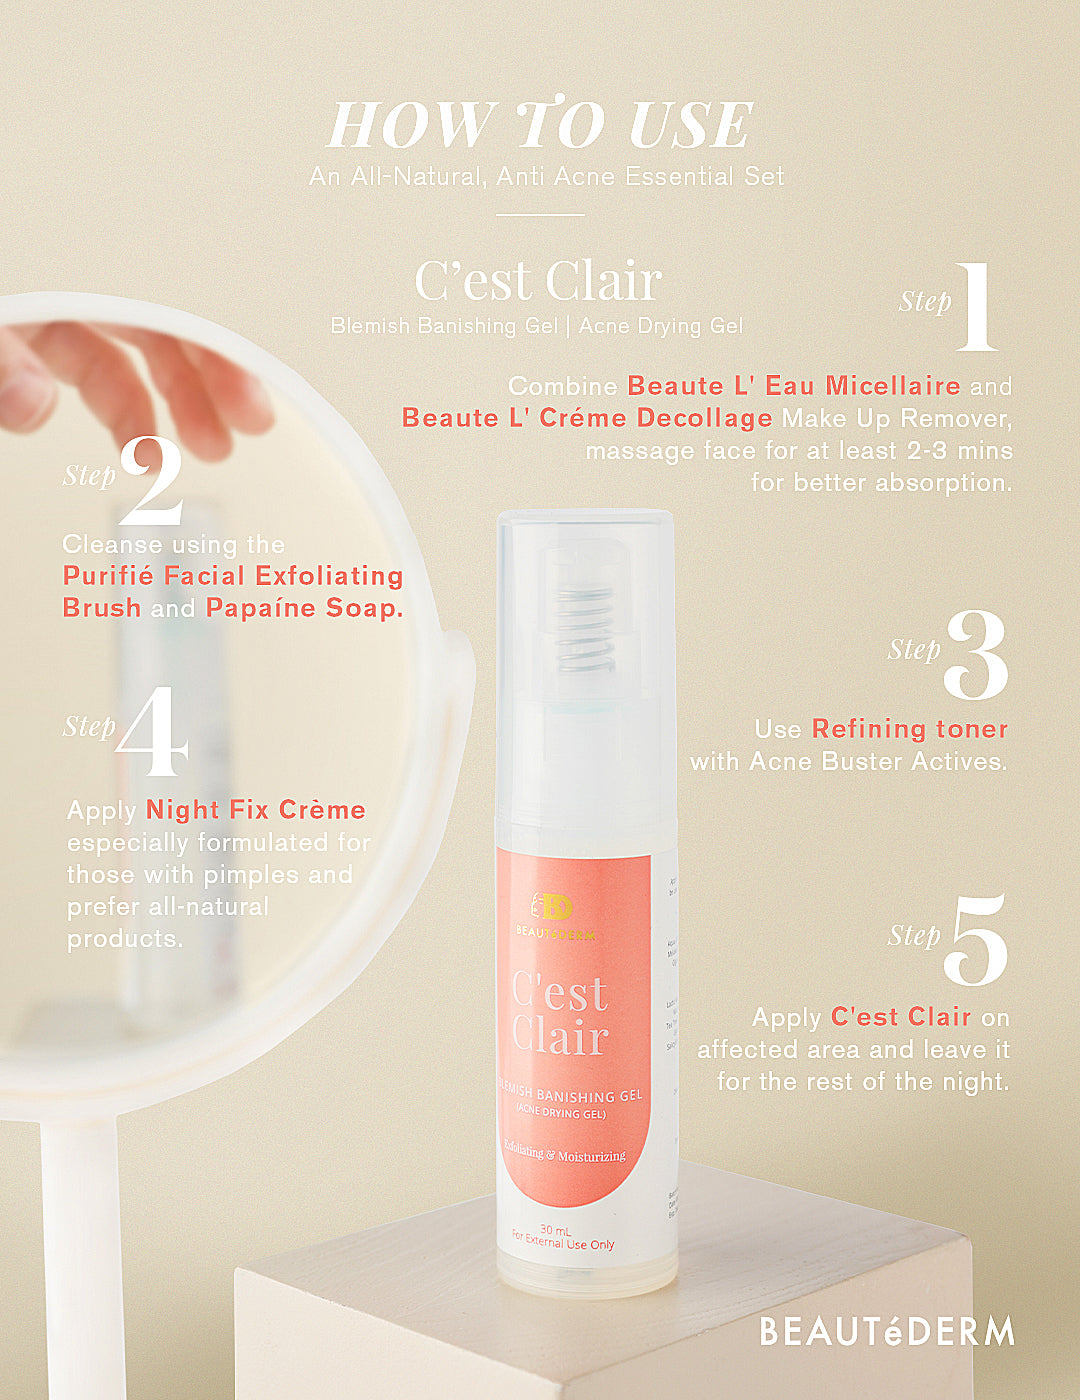 Beautederm Cest Clair Acne Drying Gel Direction How to use